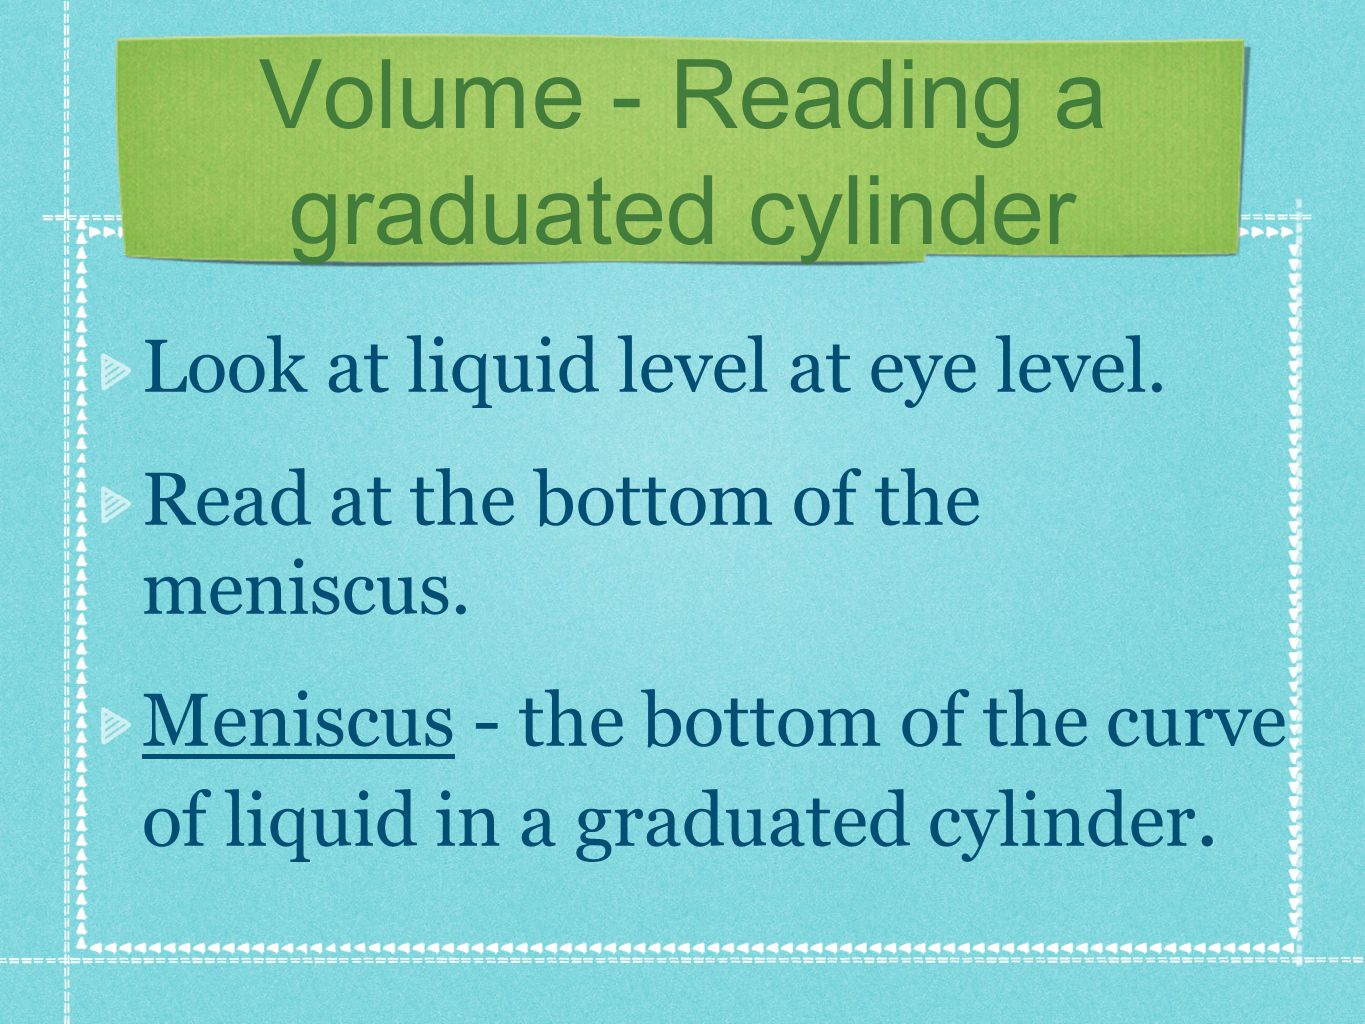 Volume - Reading a graduated cylinder Look at liquid level at eye level.